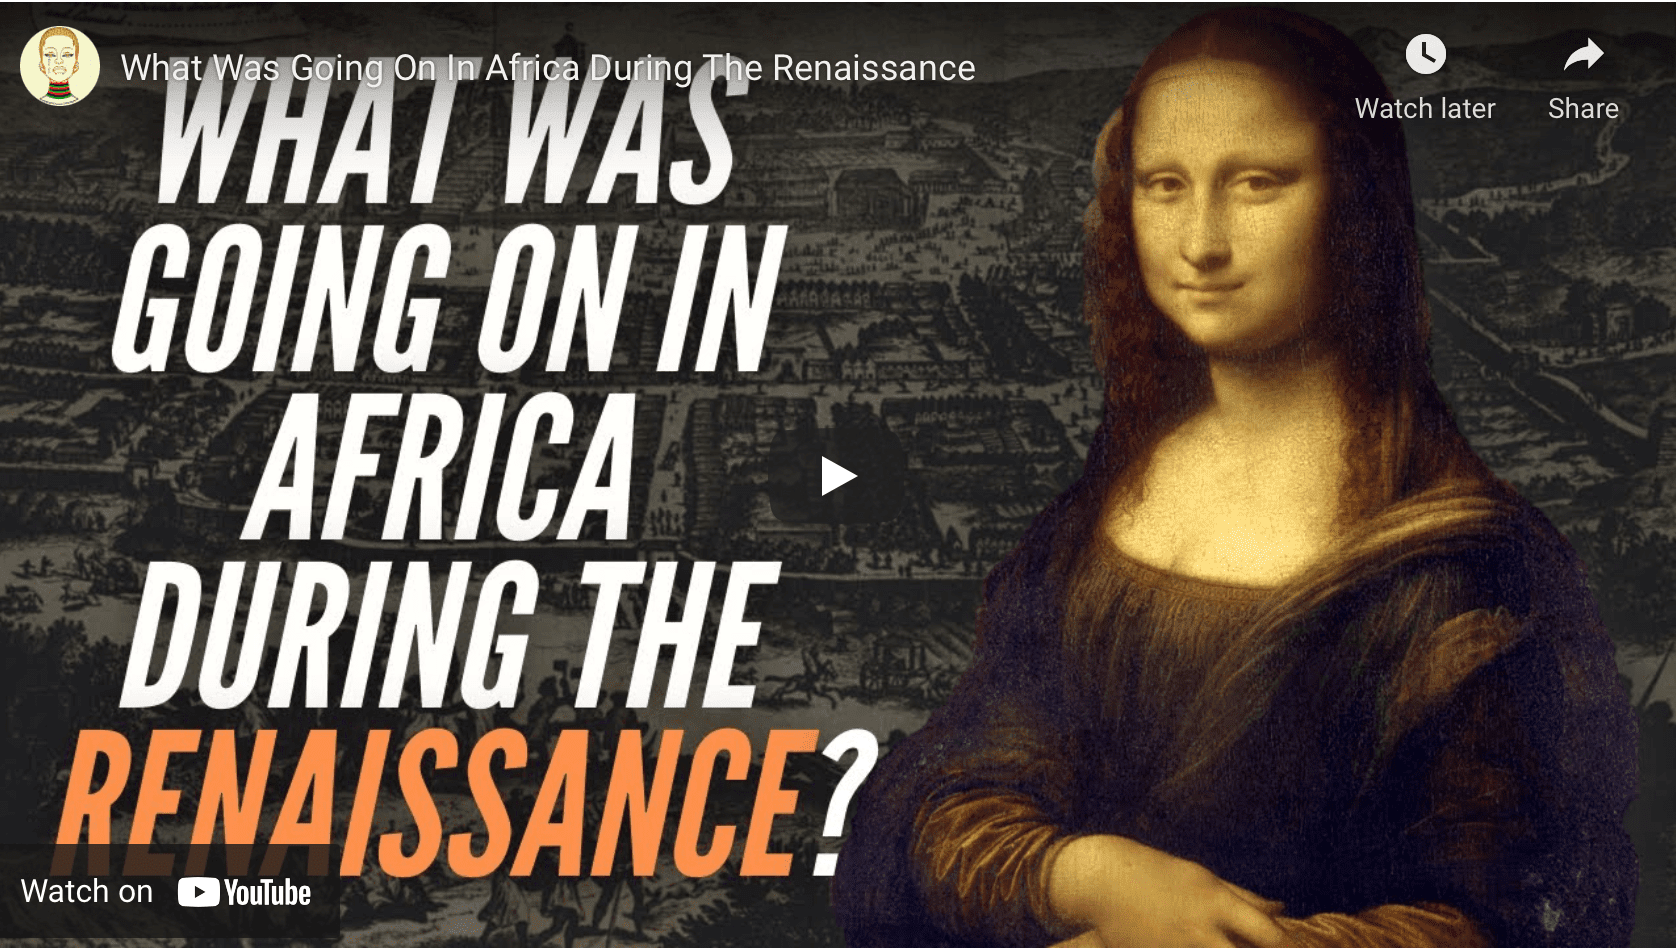 Africa during the Renaissance